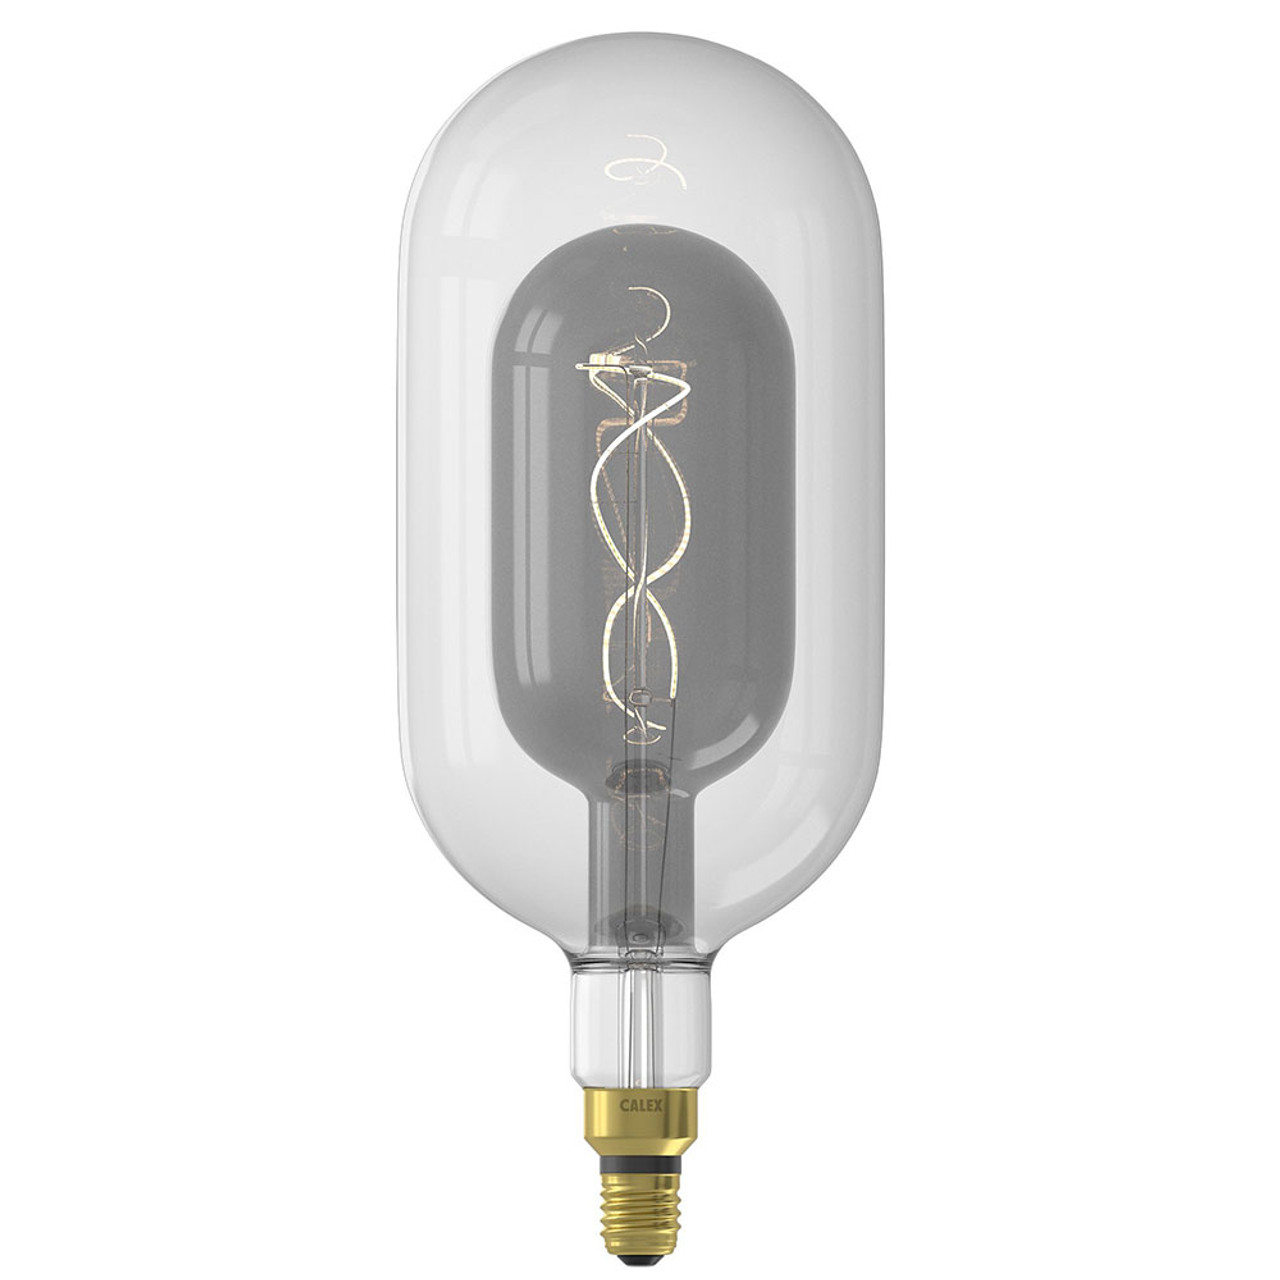 Sundsvall Clear/Titanium LED lamp 3W 100lm 2200K Dimmable E27